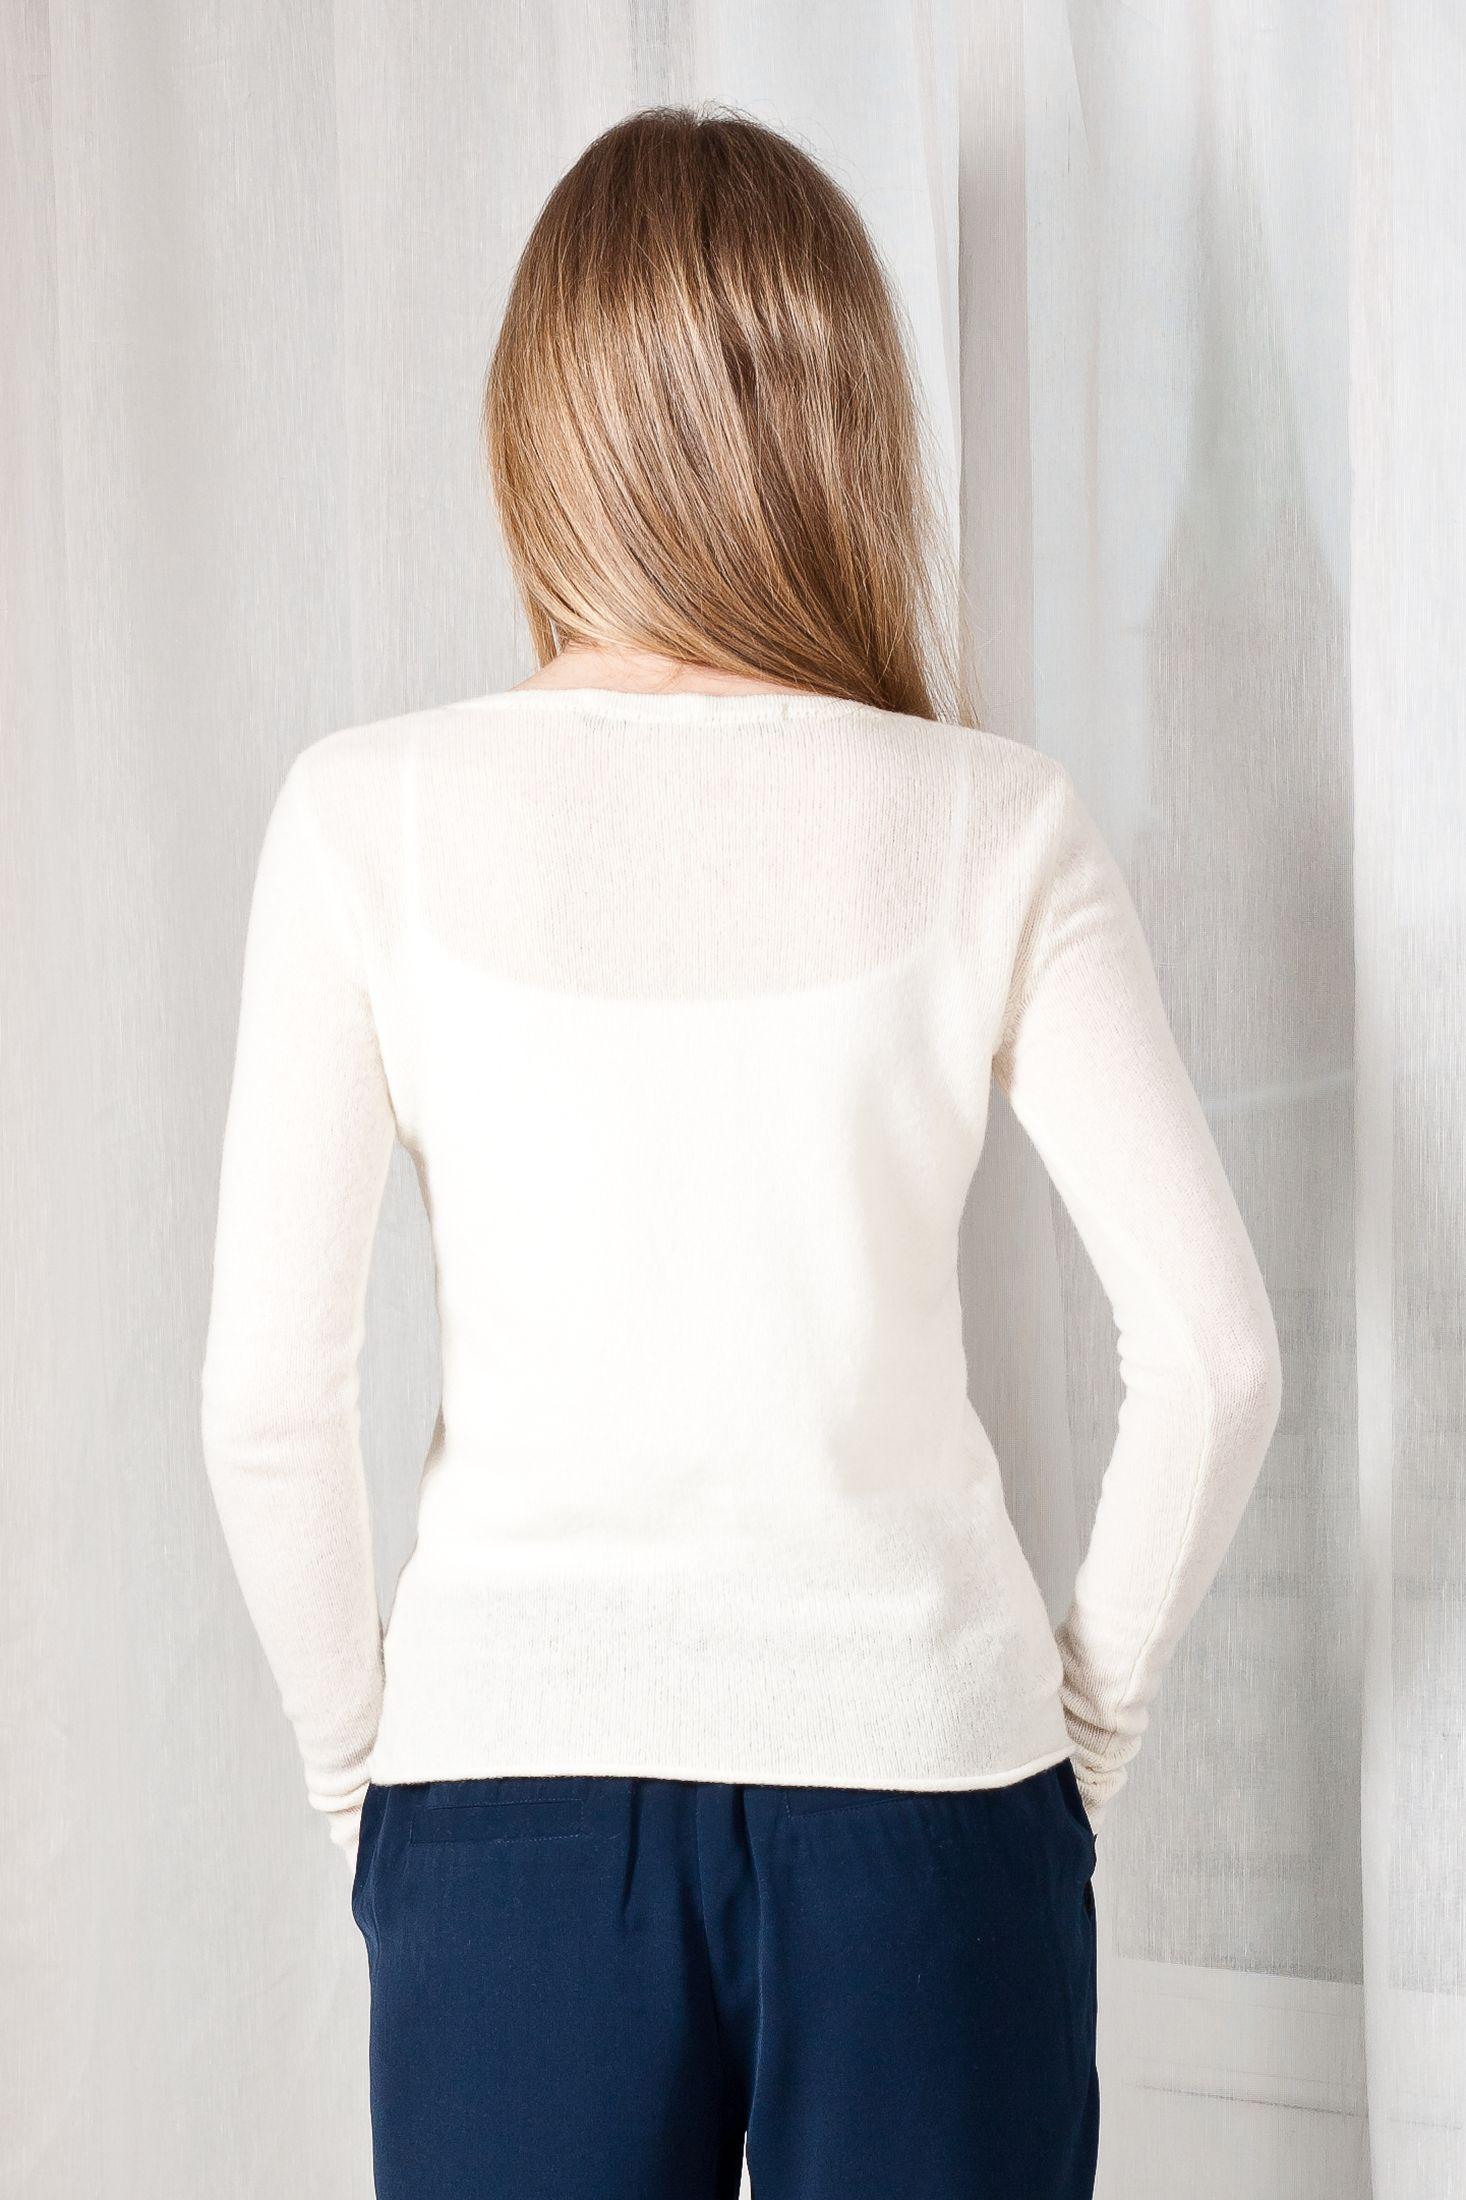 Experience the allure of MARGO V, Krista Elsta's off-white cashmere V-neck sweater. A perfect blend of comfort and chic style for any occasion.